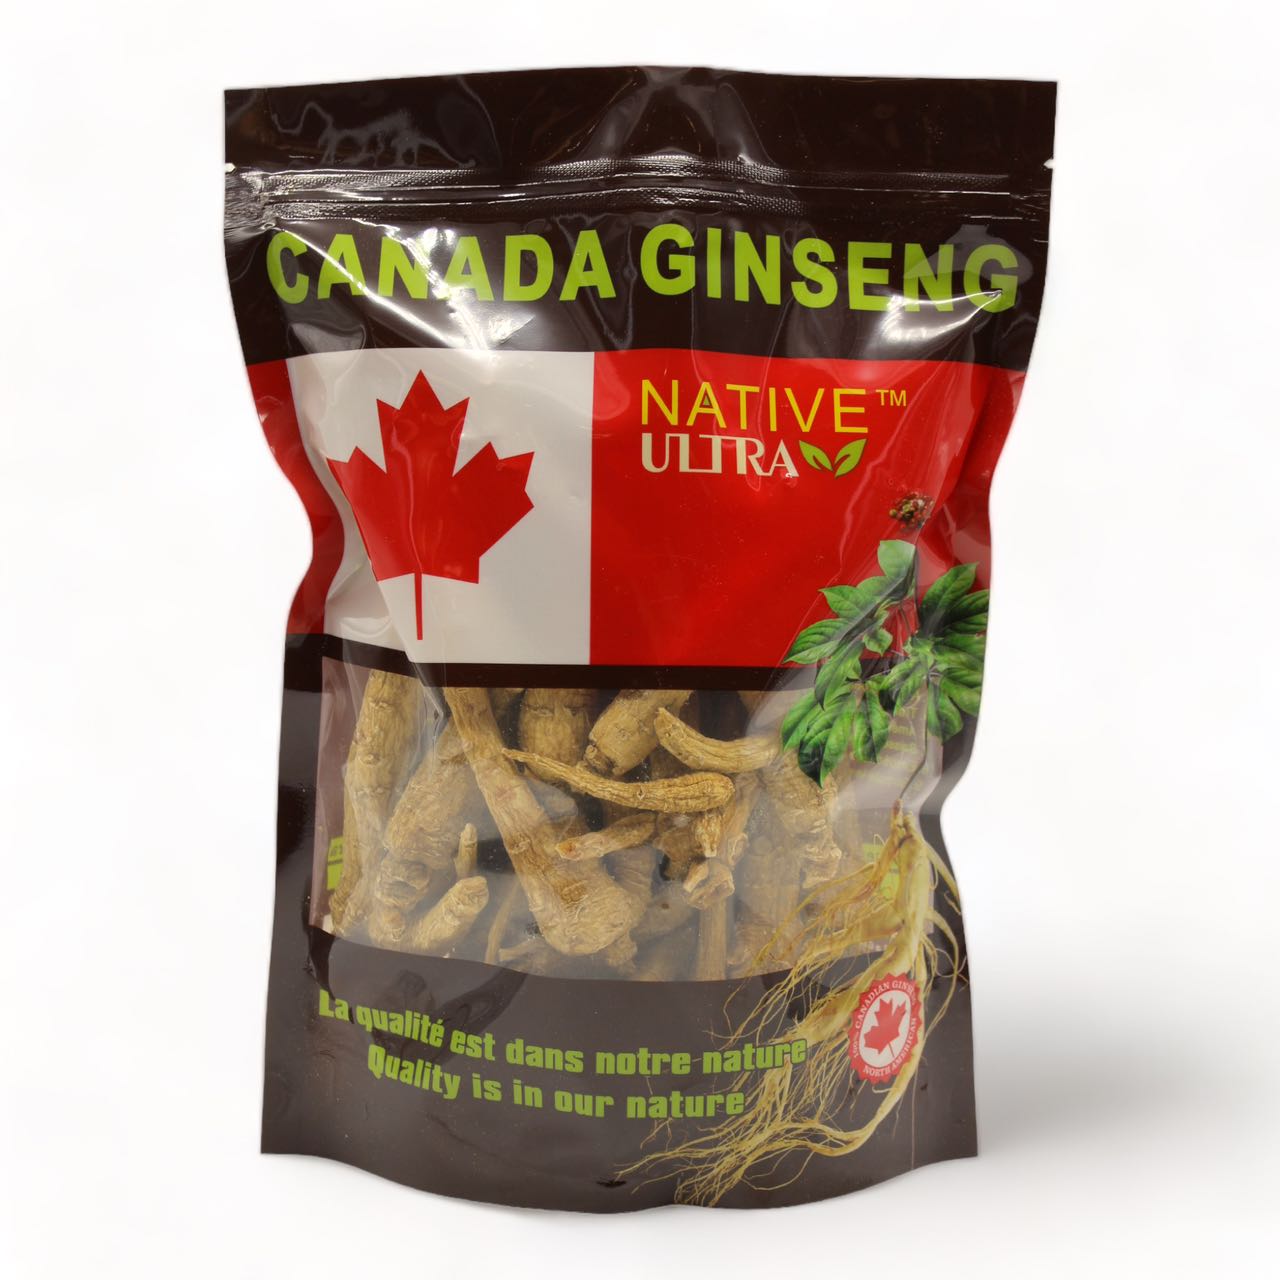 "NATIVE ULTRA" 4-Year Canadian Ginseng Whole Roots, 454g/bag